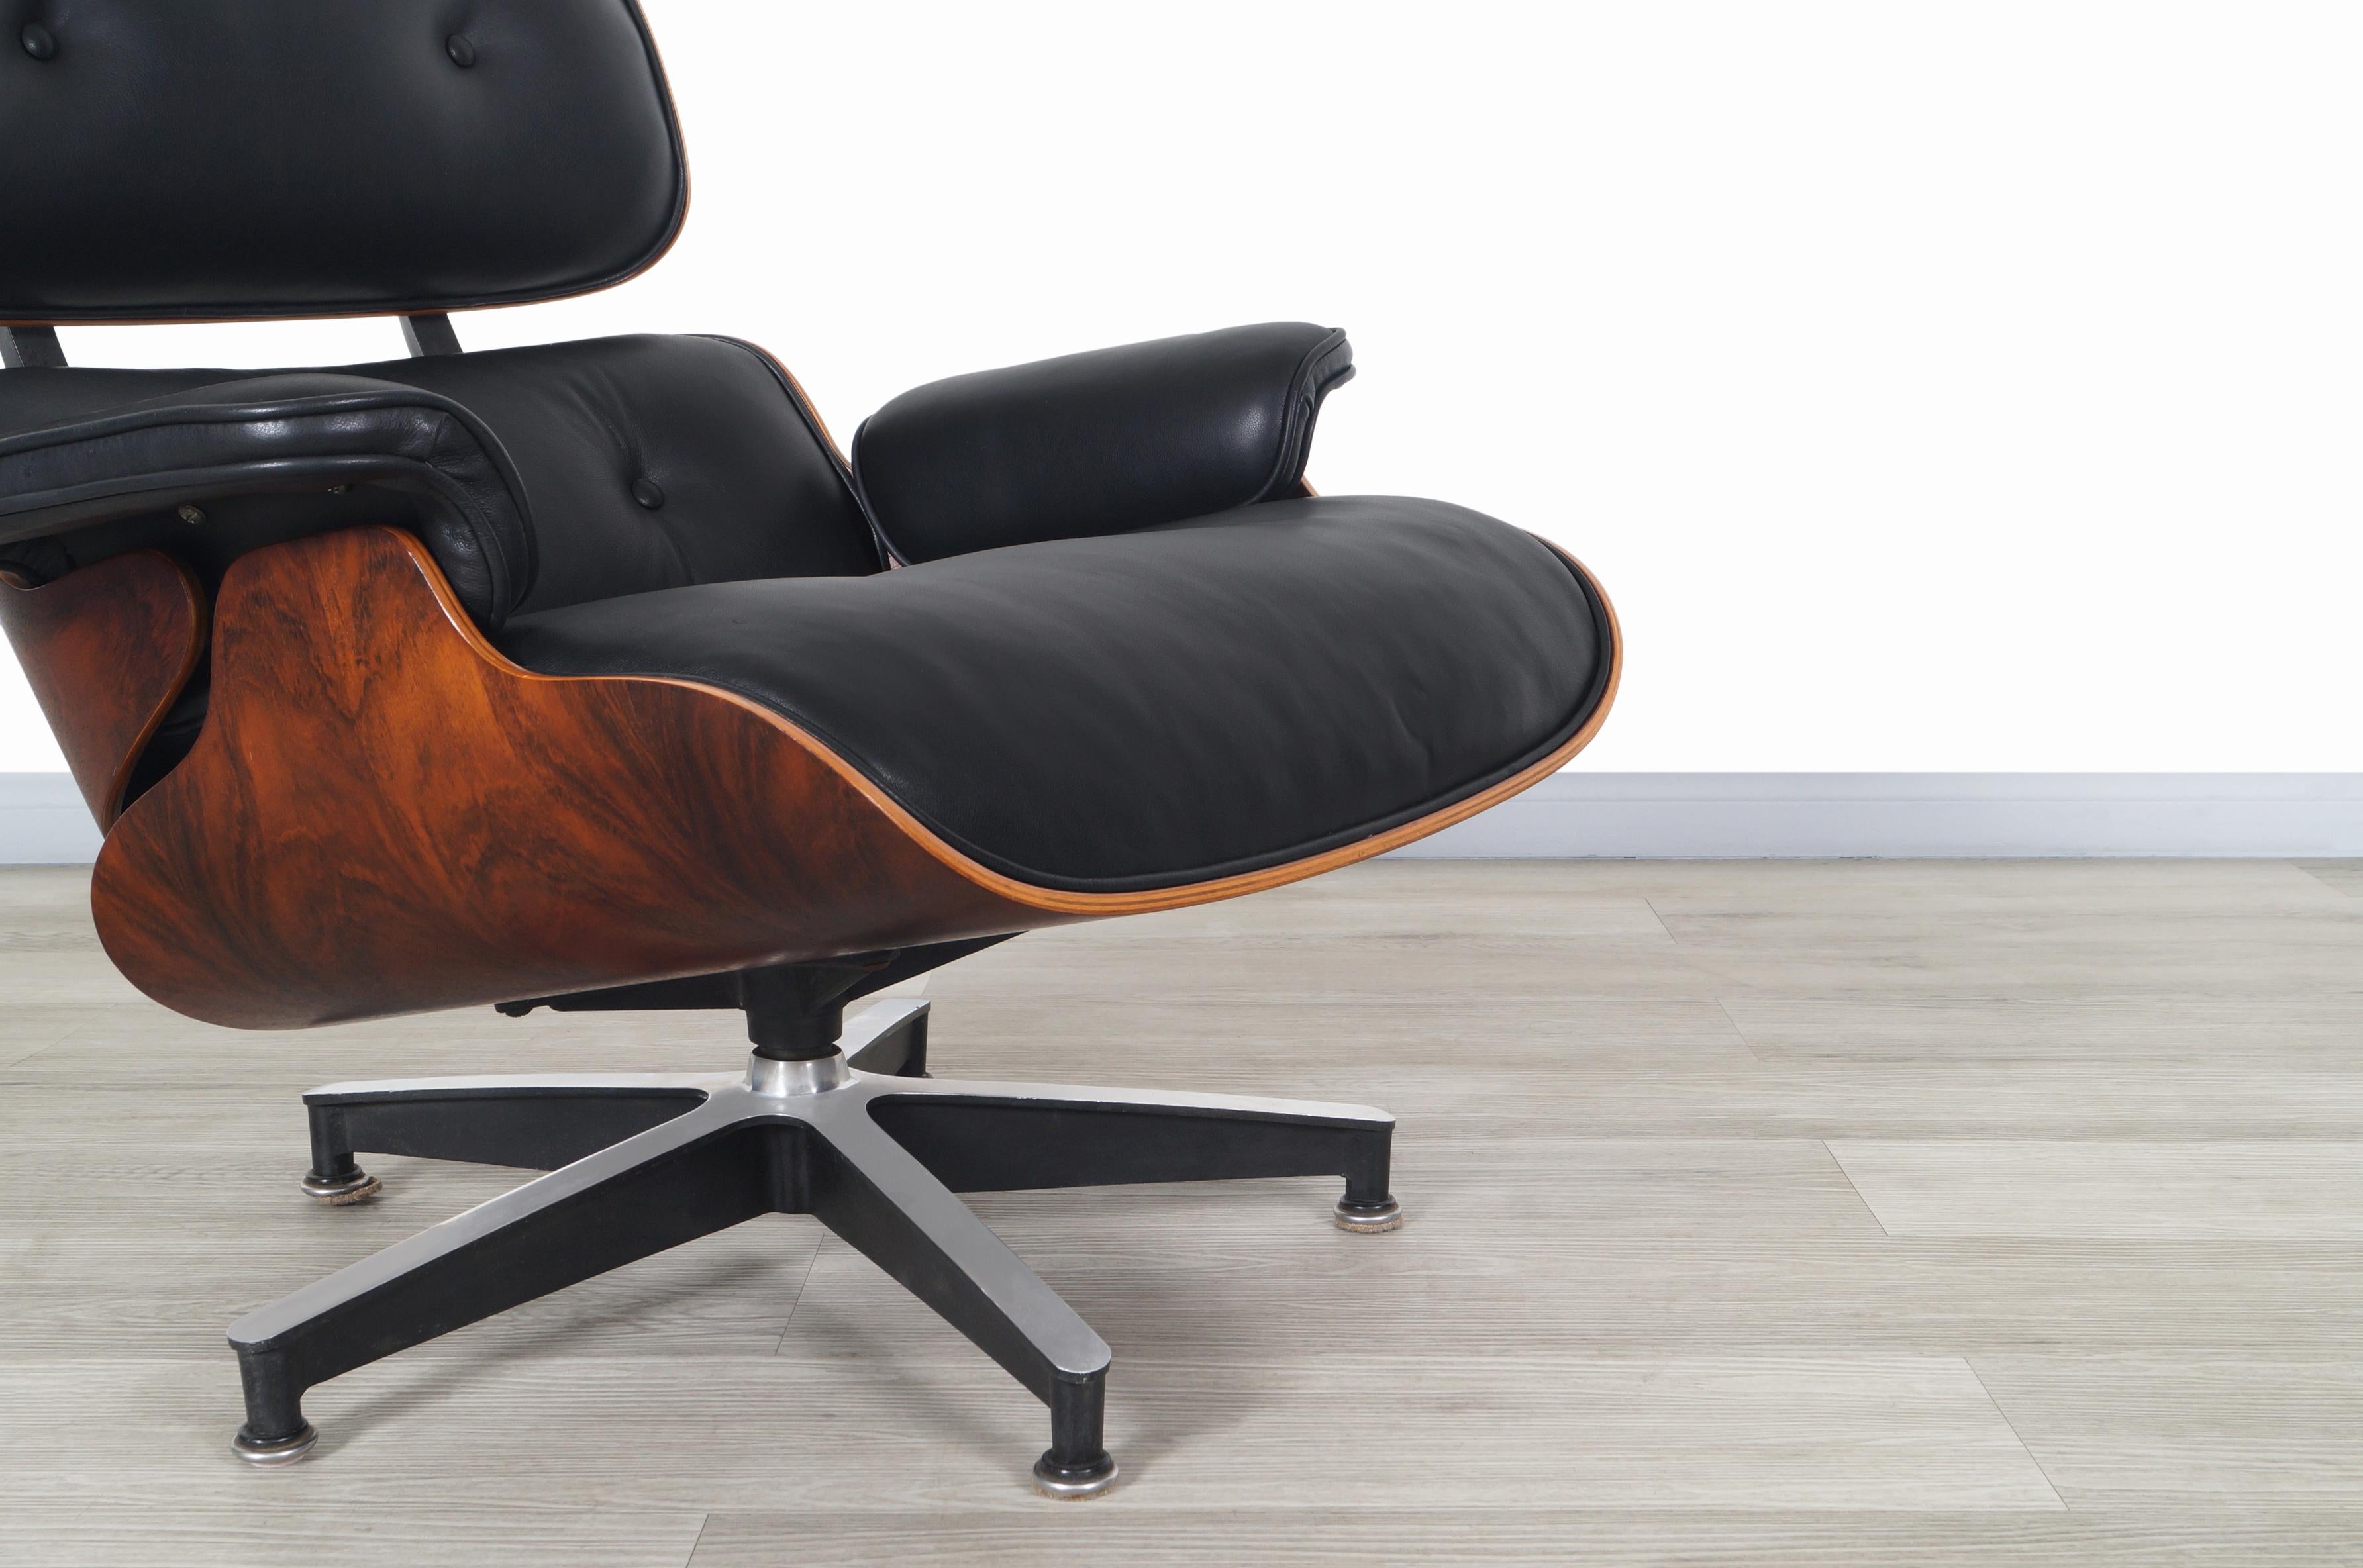 Aluminum Charles Eames Rosewood Lounge Chair and Ottoman by Herman Miller